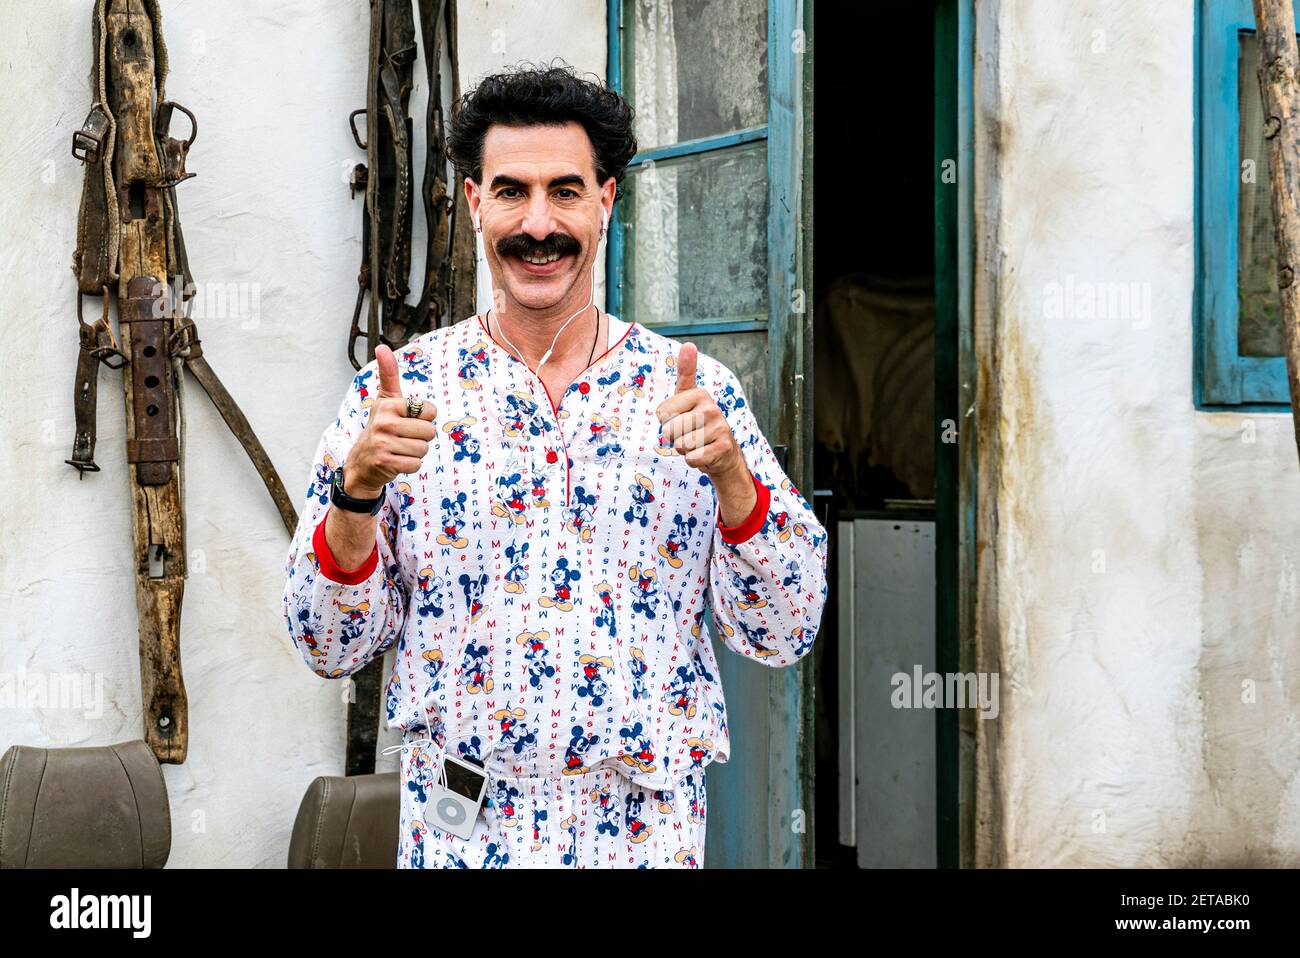 Borat Subsequent Moviefilm (2020) directed by Jason Woliner and starring Sacha Baron Cohen and Maria Bakalova. The further adventures of a Kazakh television journalist Borat in the United States. Stock Photo